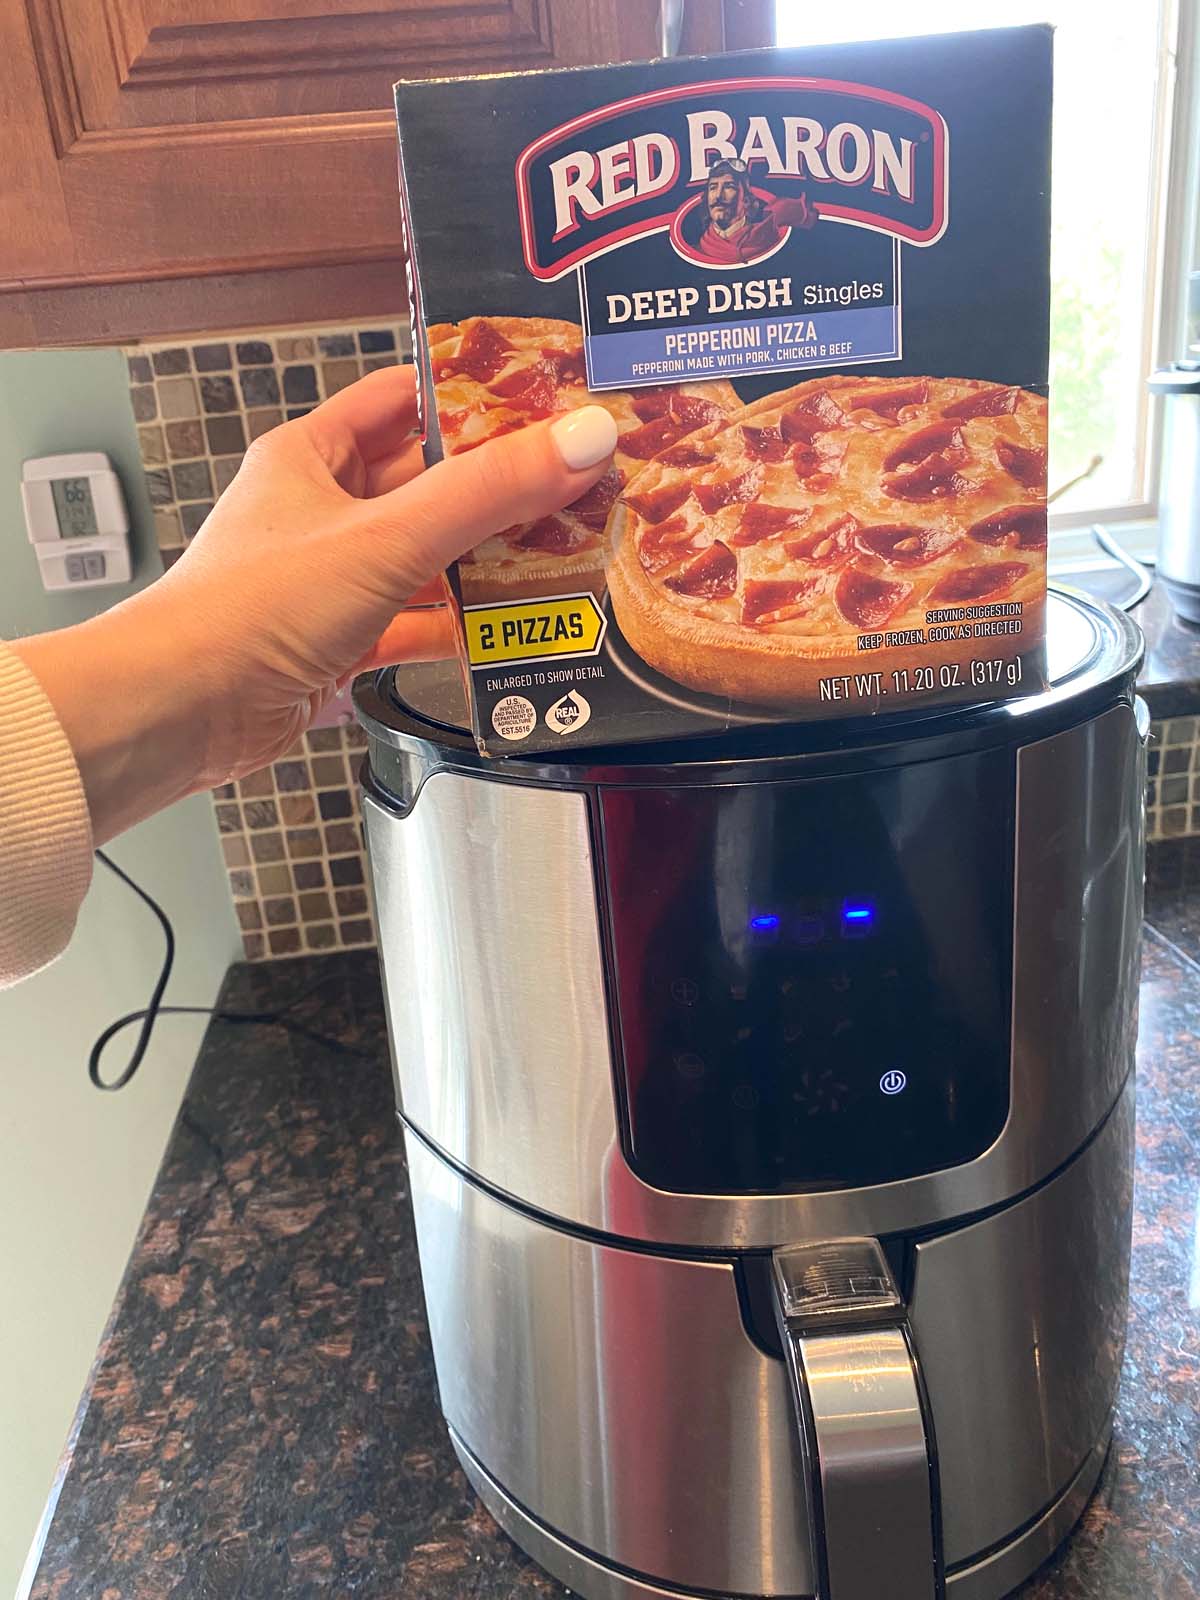 A box of Red Baron Deep dish singles pepperoni pizza being shown over an air fryer.